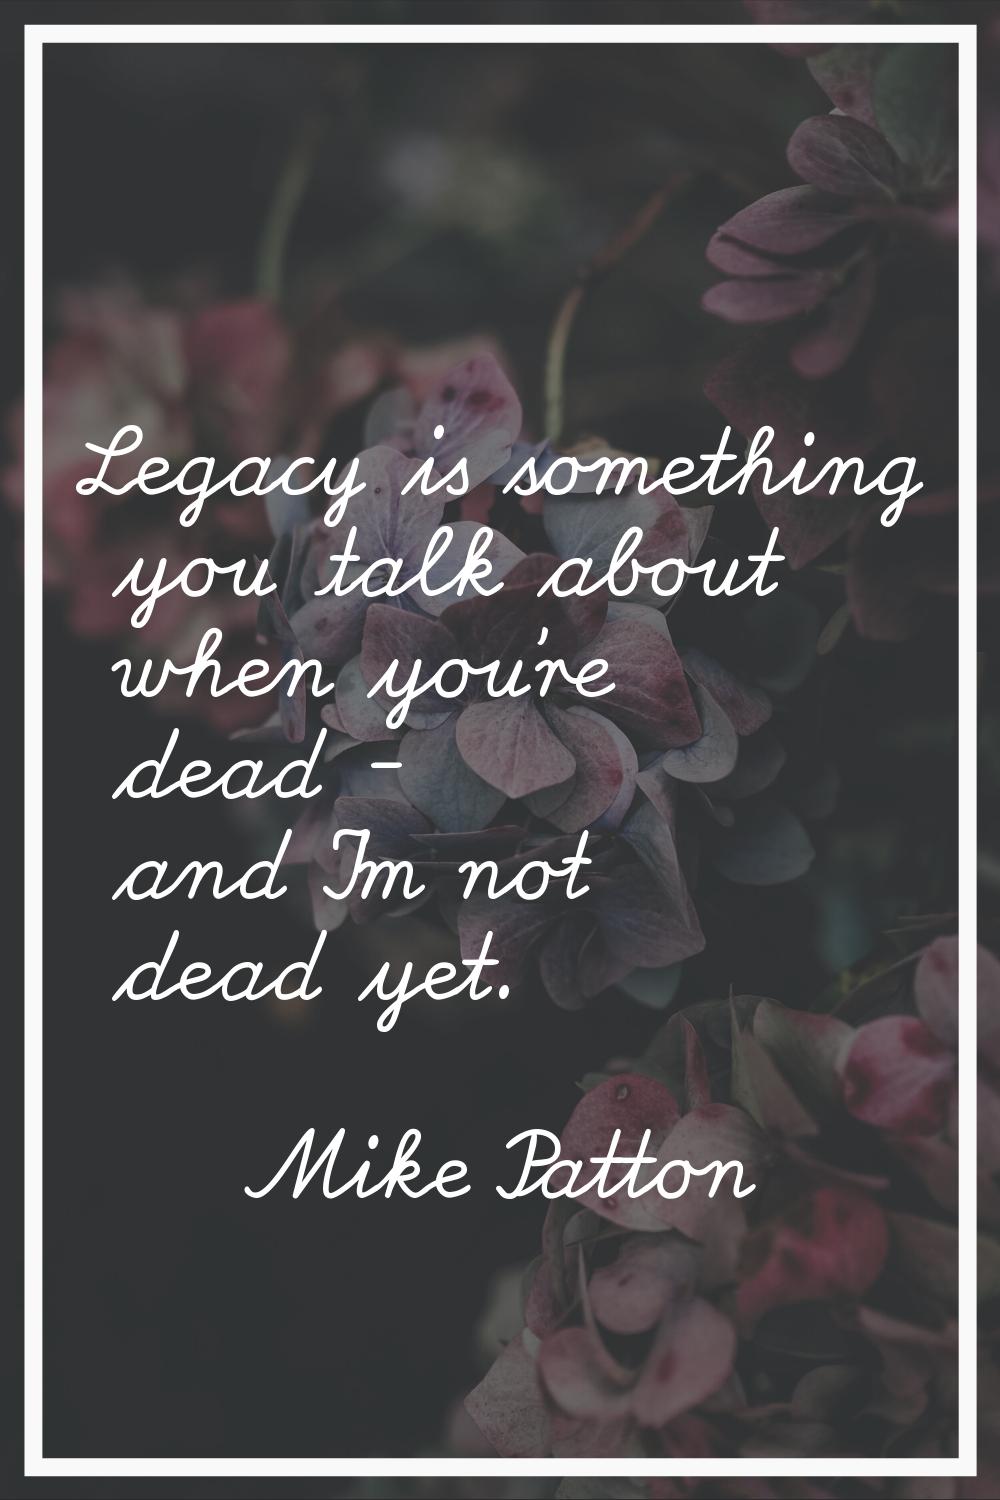 Legacy is something you talk about when you're dead - and I'm not dead yet.